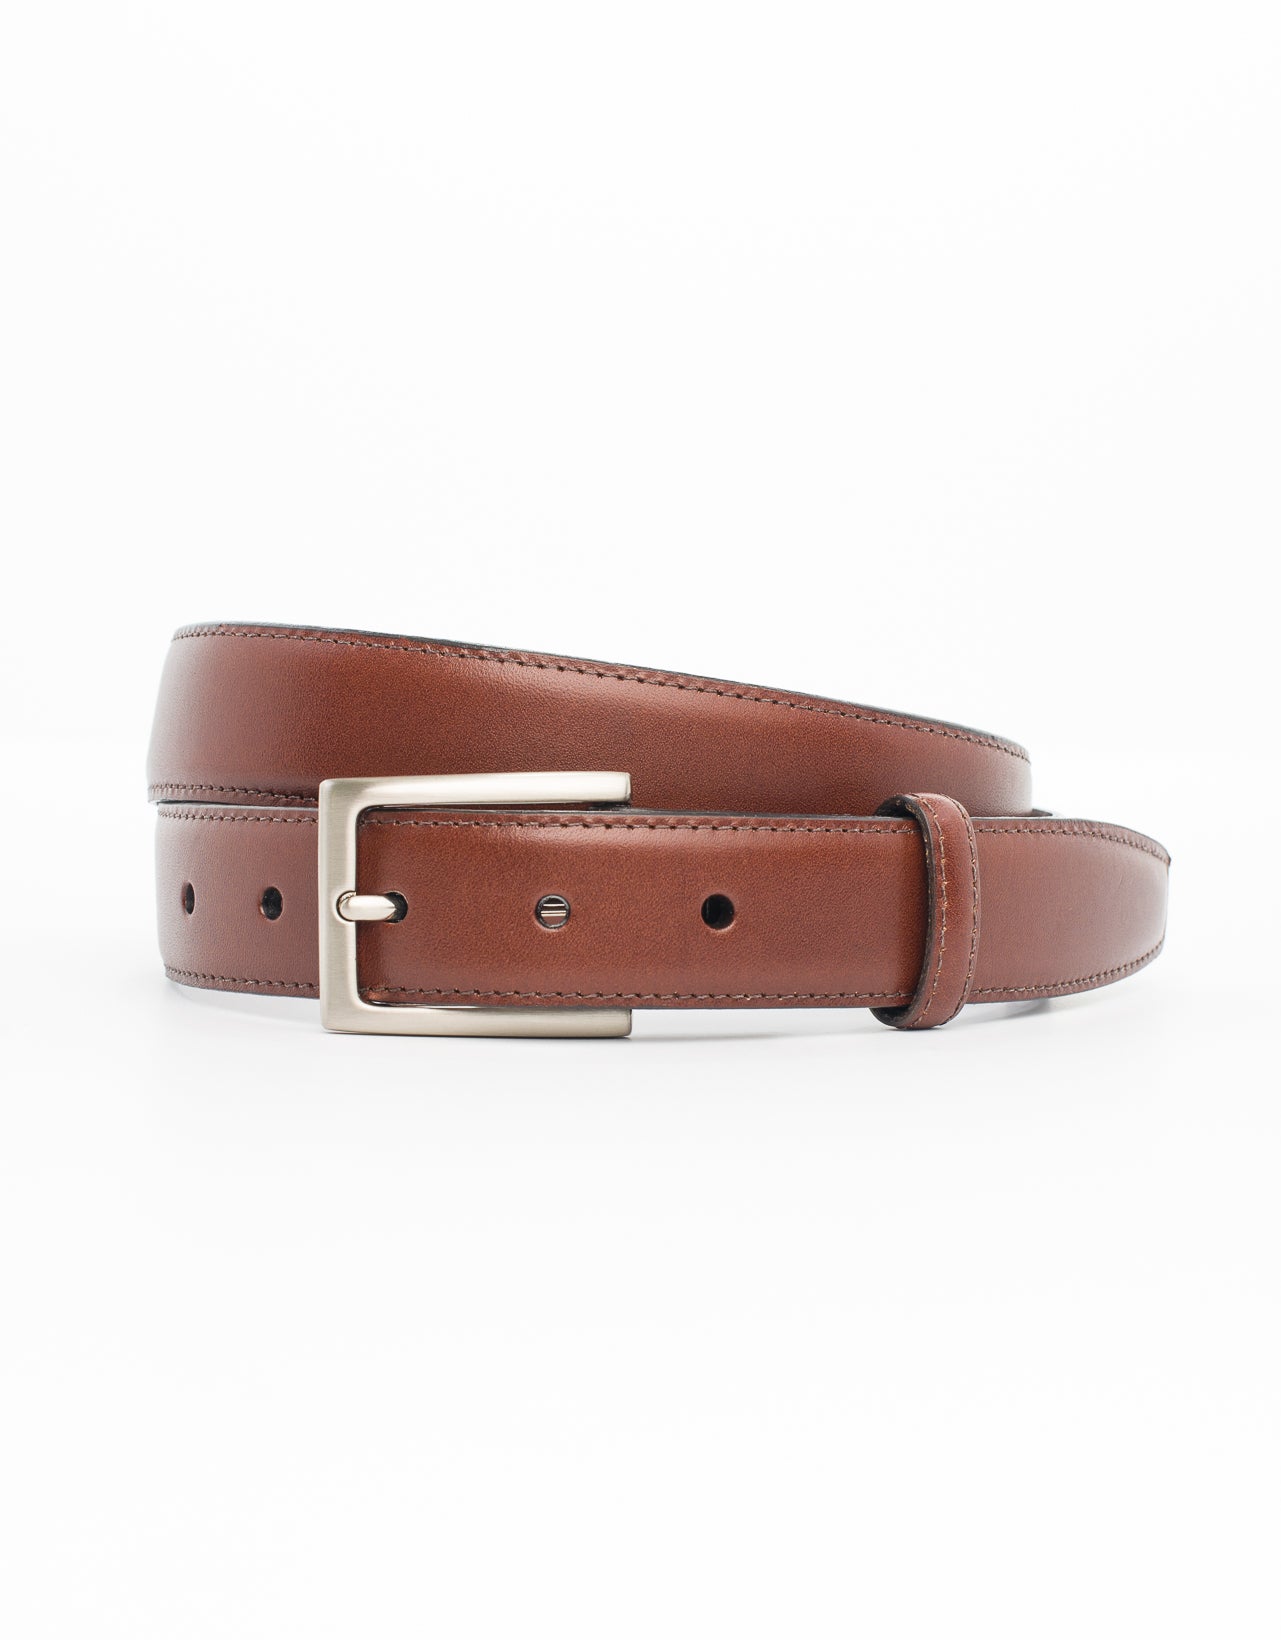 COGNAC WITH SILVER ITALIAN LEATHER BELT